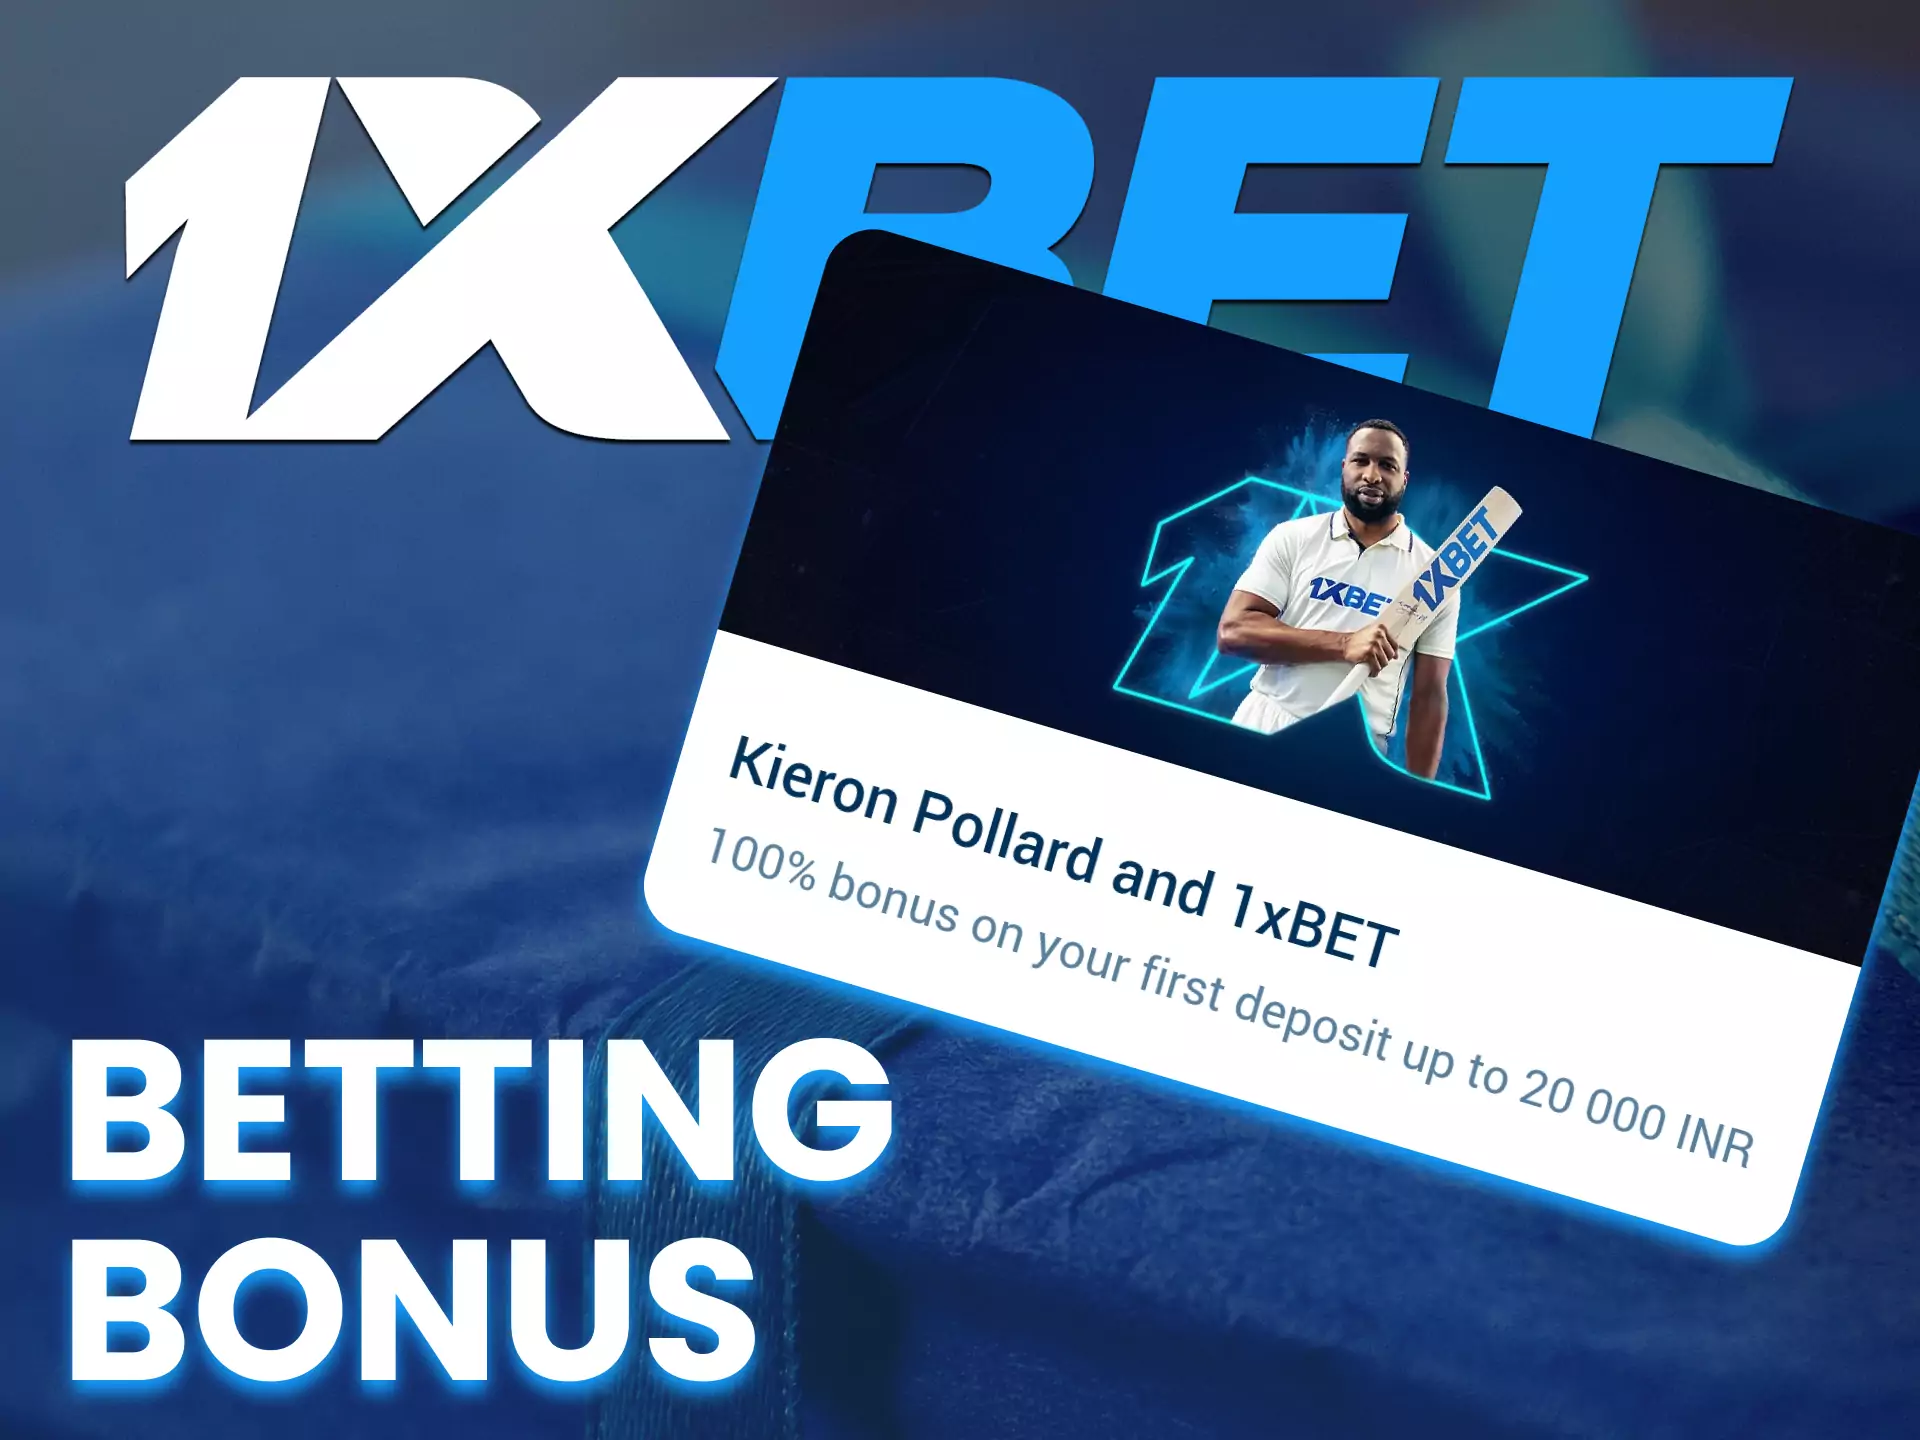 At 1xBet, make your first deposit and get a bonus.